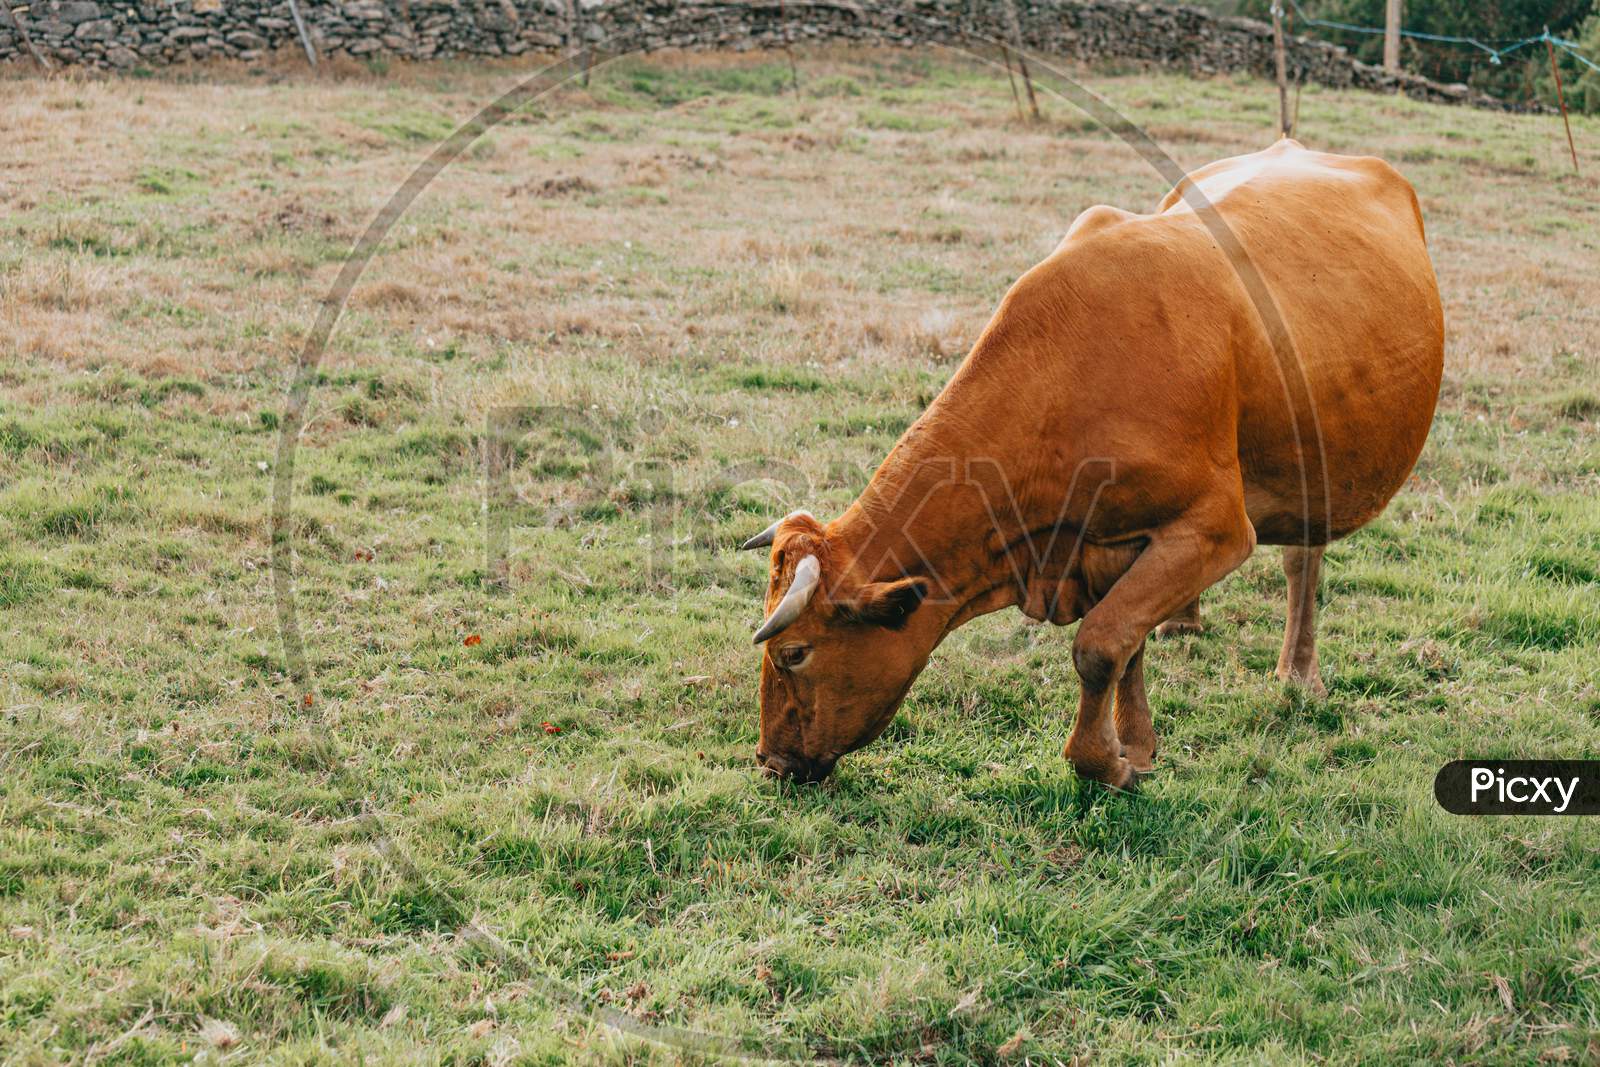 Brown And Super Big Cow Eating Over Green Grass In The Farm